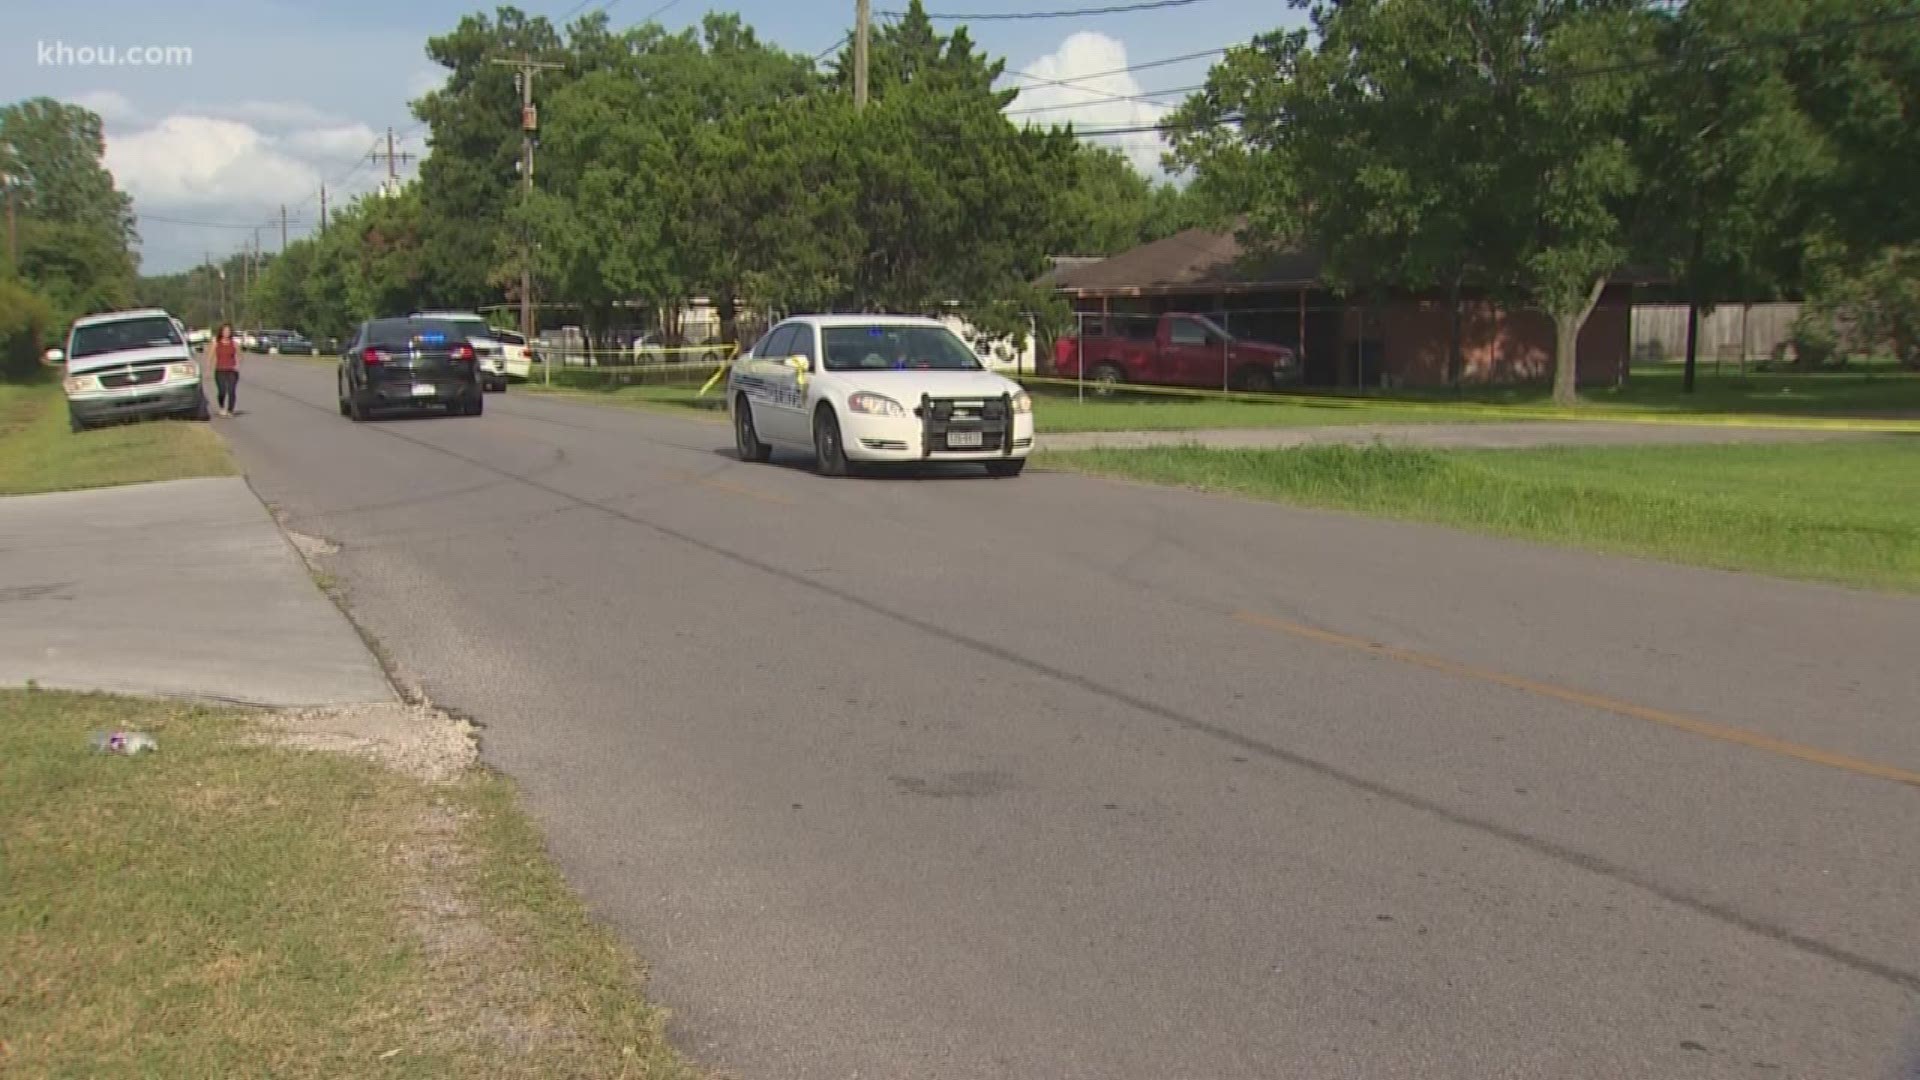 A 13-year-old is dead after an attempted carjacking in north Harris County, according to sheriff's detectives.

Detectives said the teenager was riding with his 16-year-old brother Sunday afternoon when they pulled over by Arlene Nichols Memorial Park with car trouble. 

That's when two people jumped into their truck and tried to steal it at gunpoint.